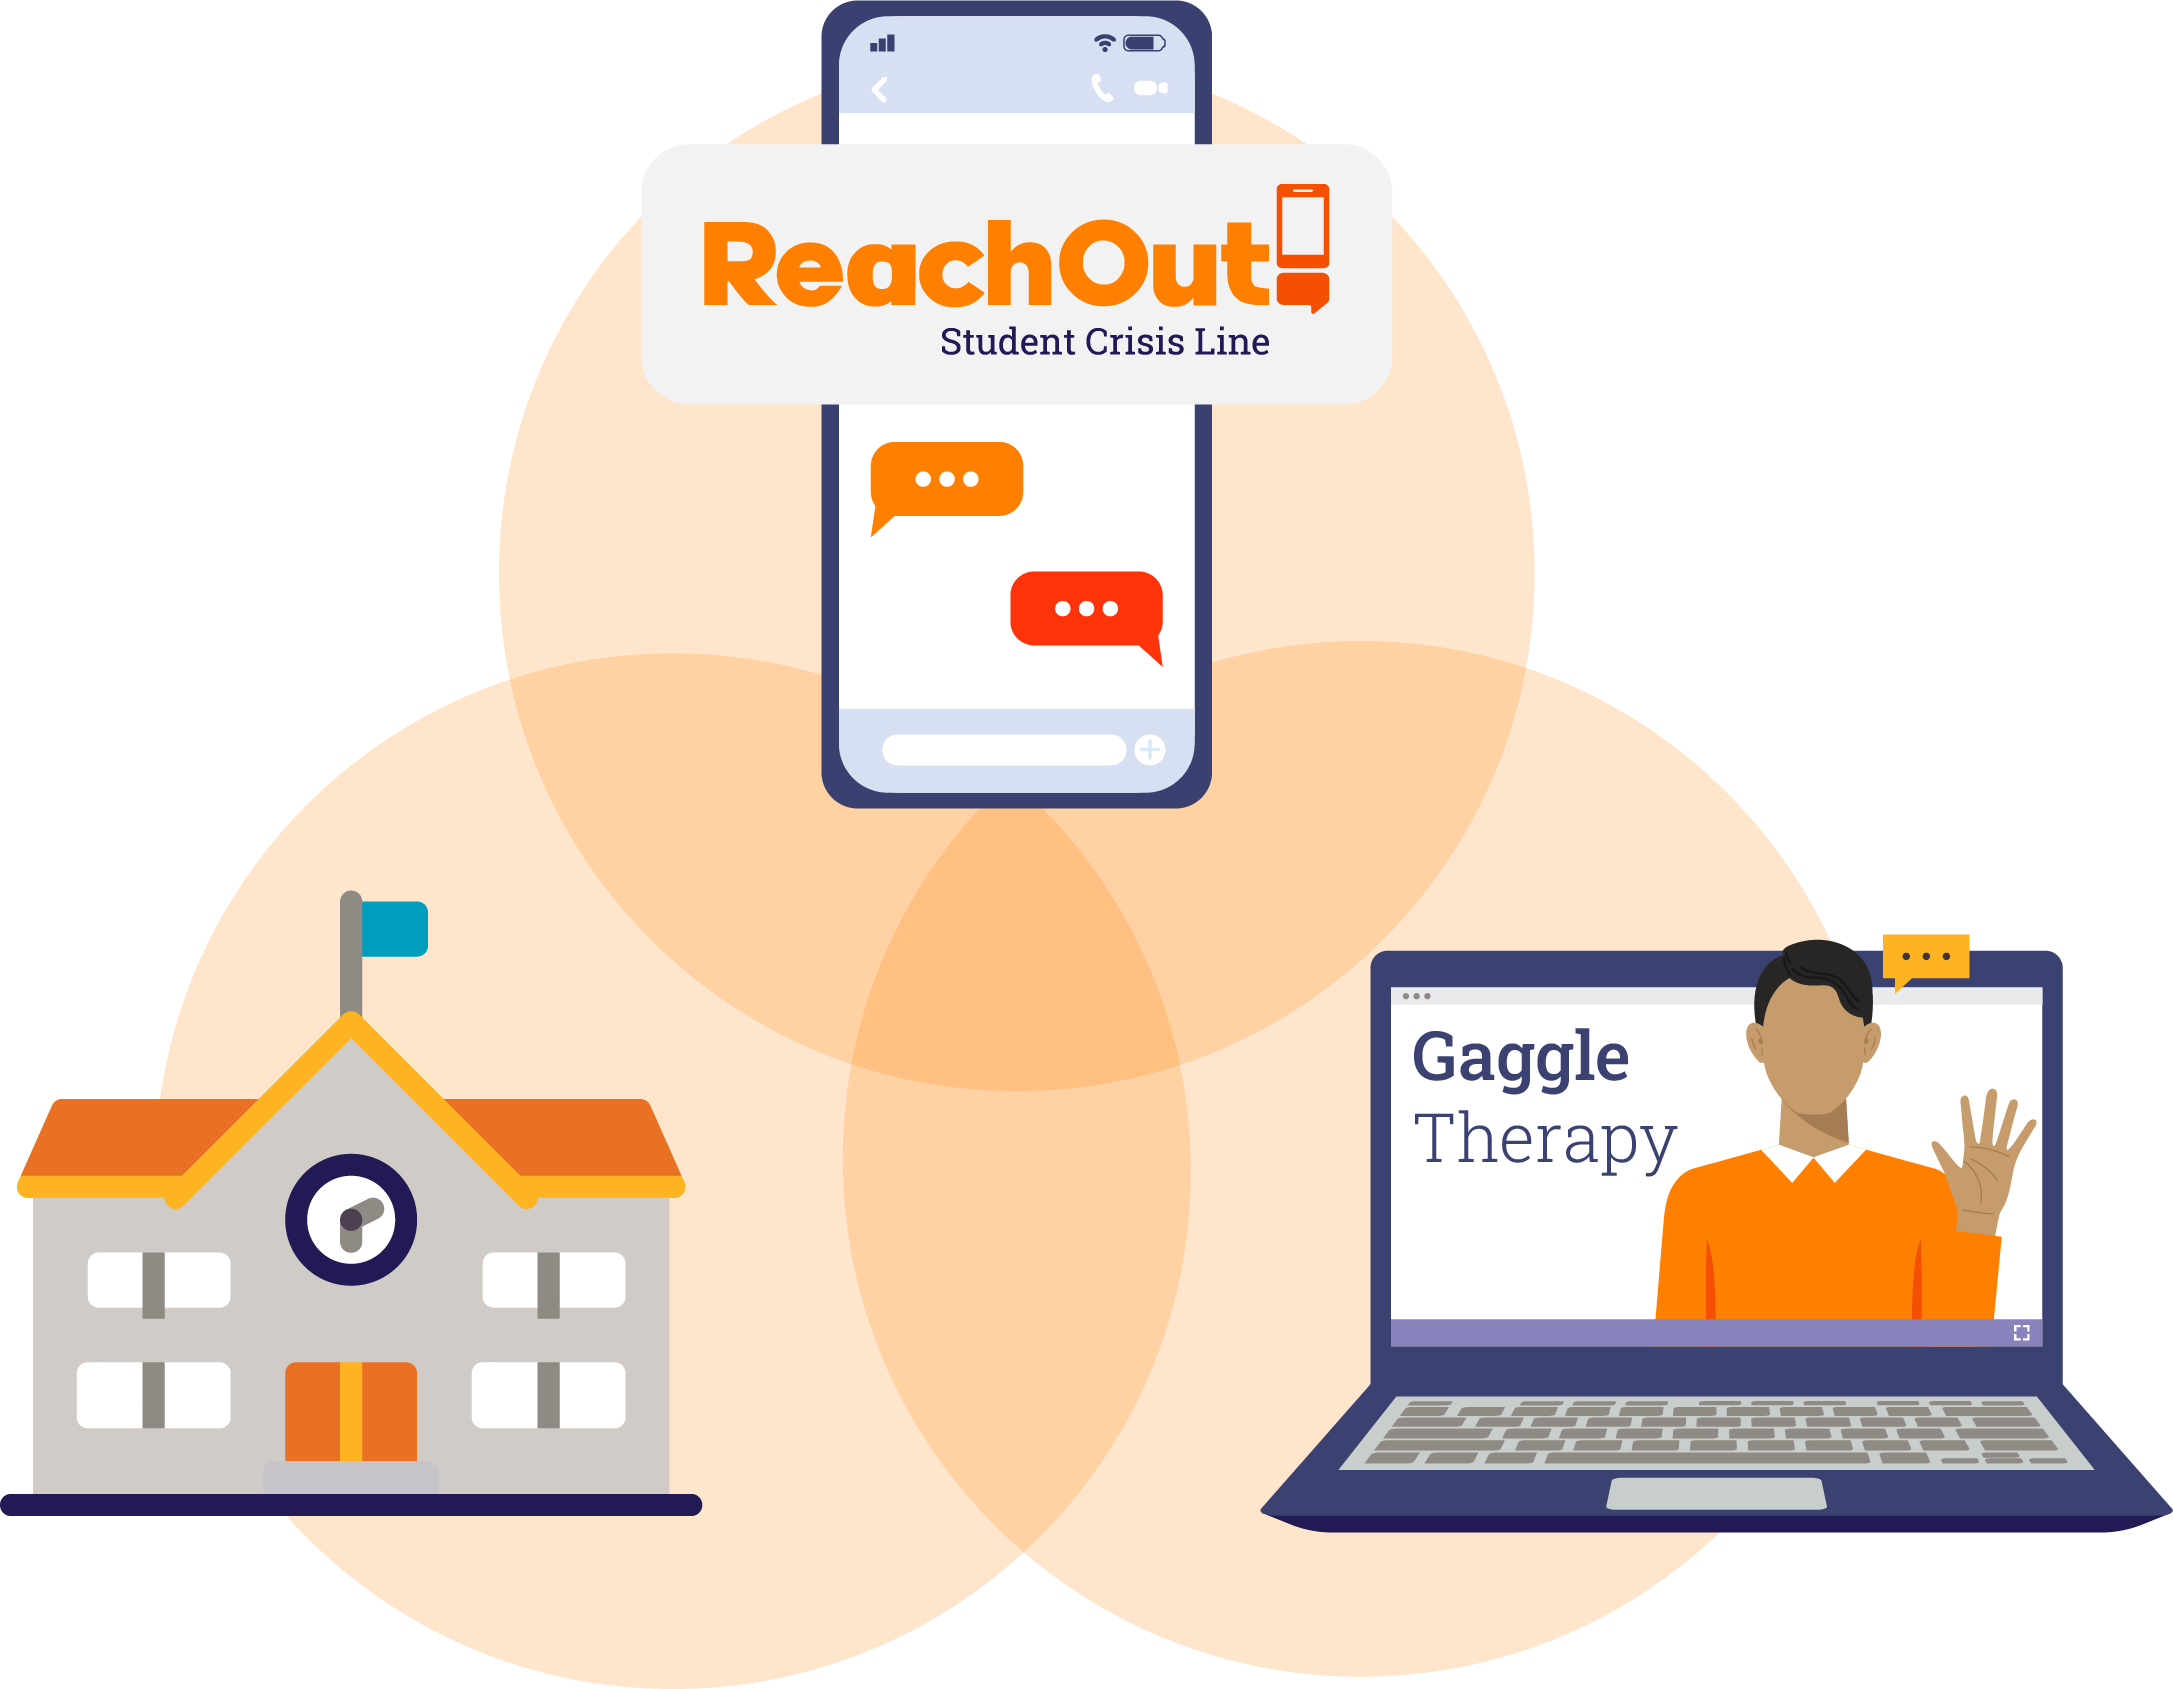 Illustrated images of cell phone with ReachOut logo, a school building and a laptop